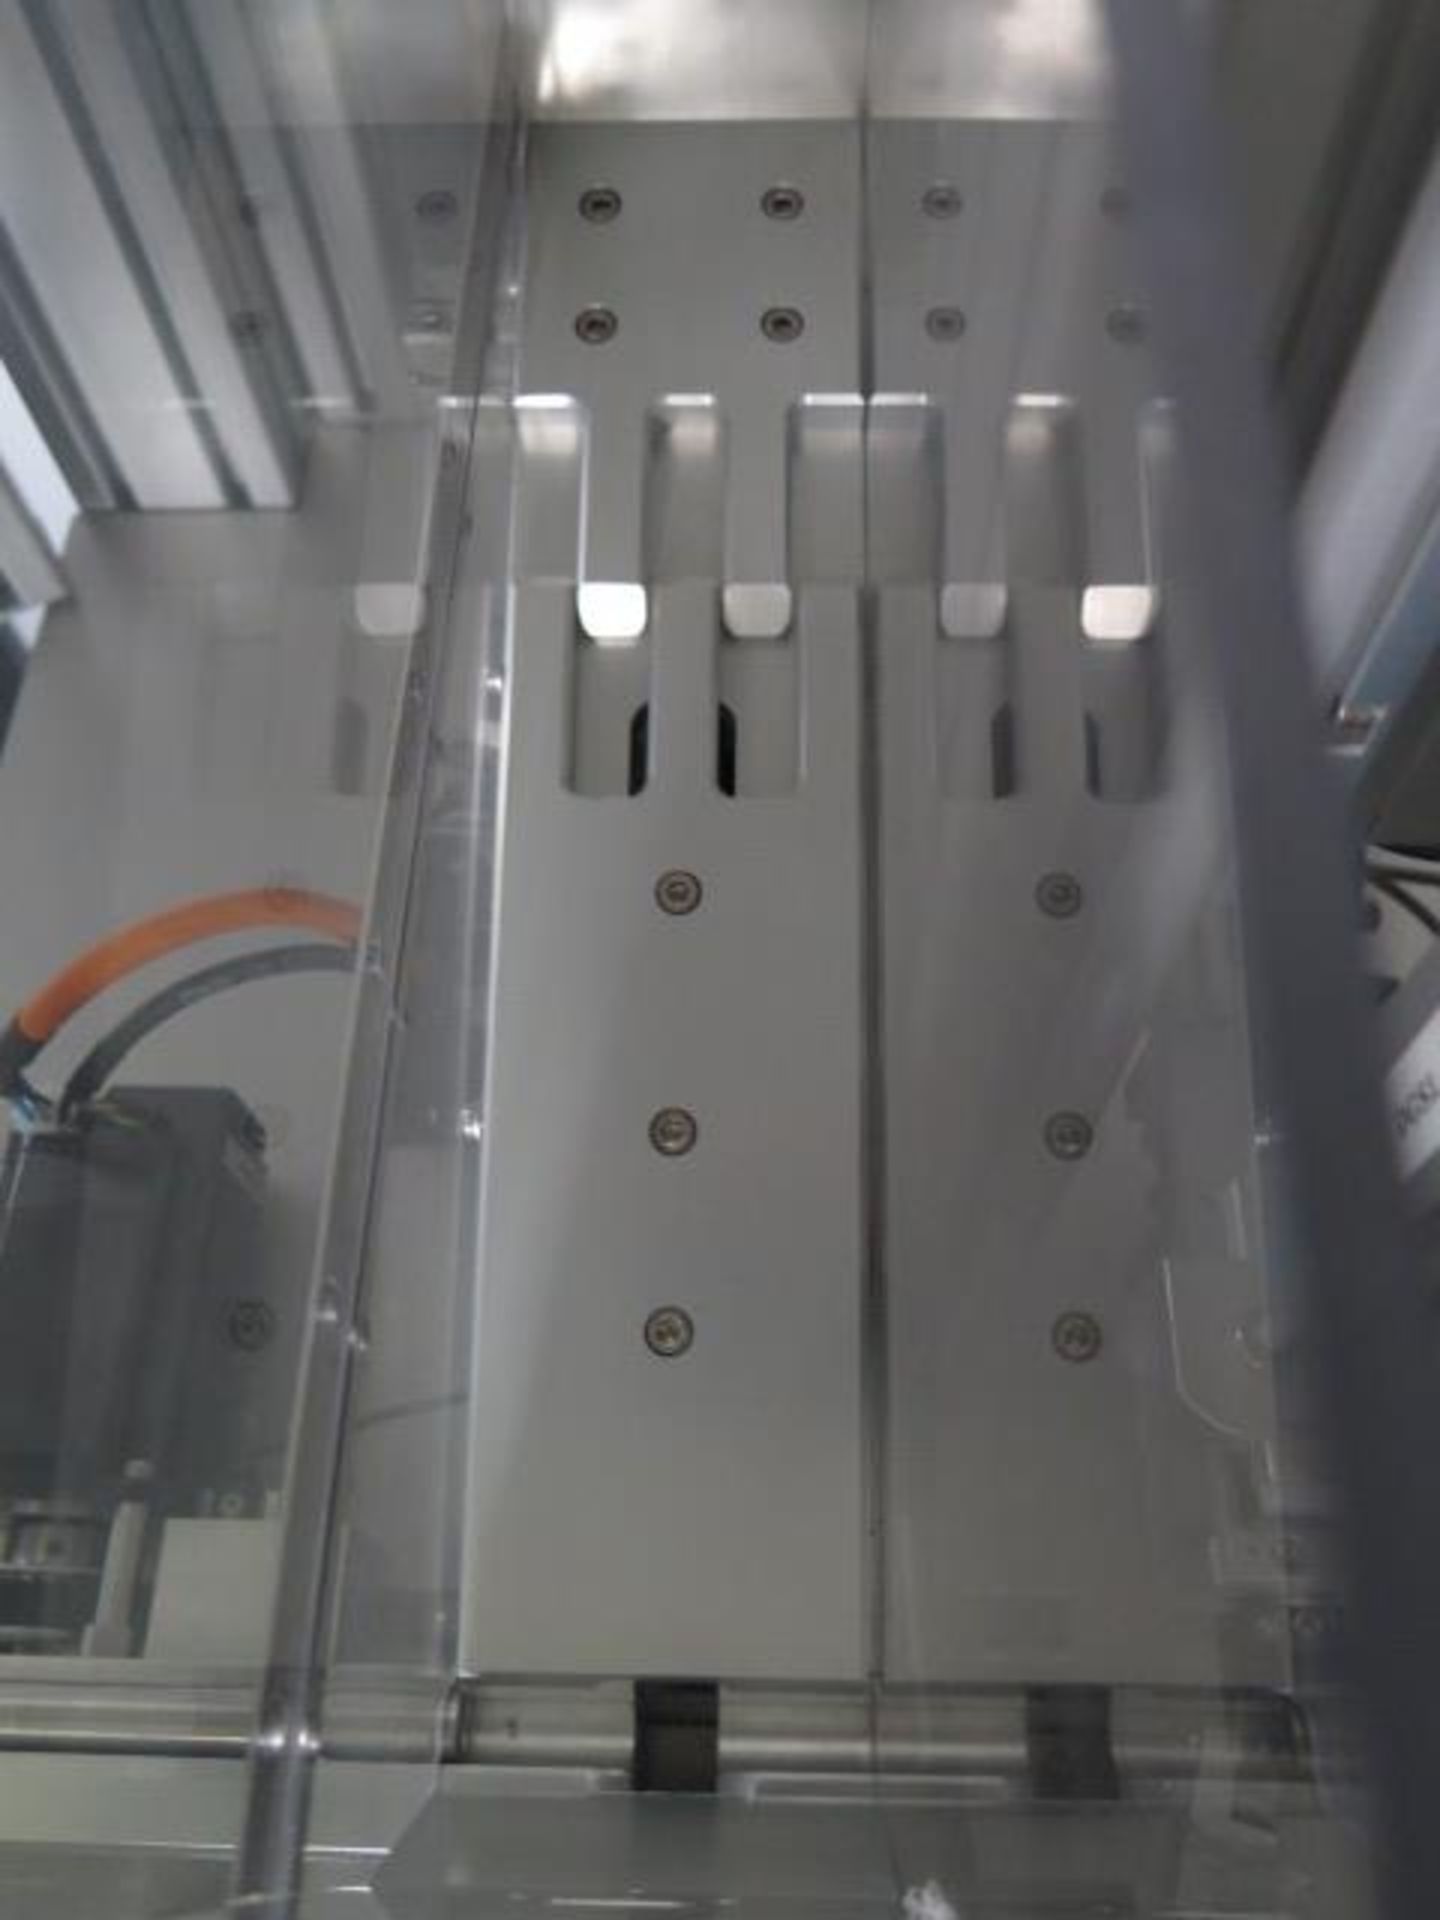 Automated Vitamin D Machine Line w/ PLC Controls, Tube and Cap Feeders, Enclosure SOLD AS-IS - Image 7 of 20